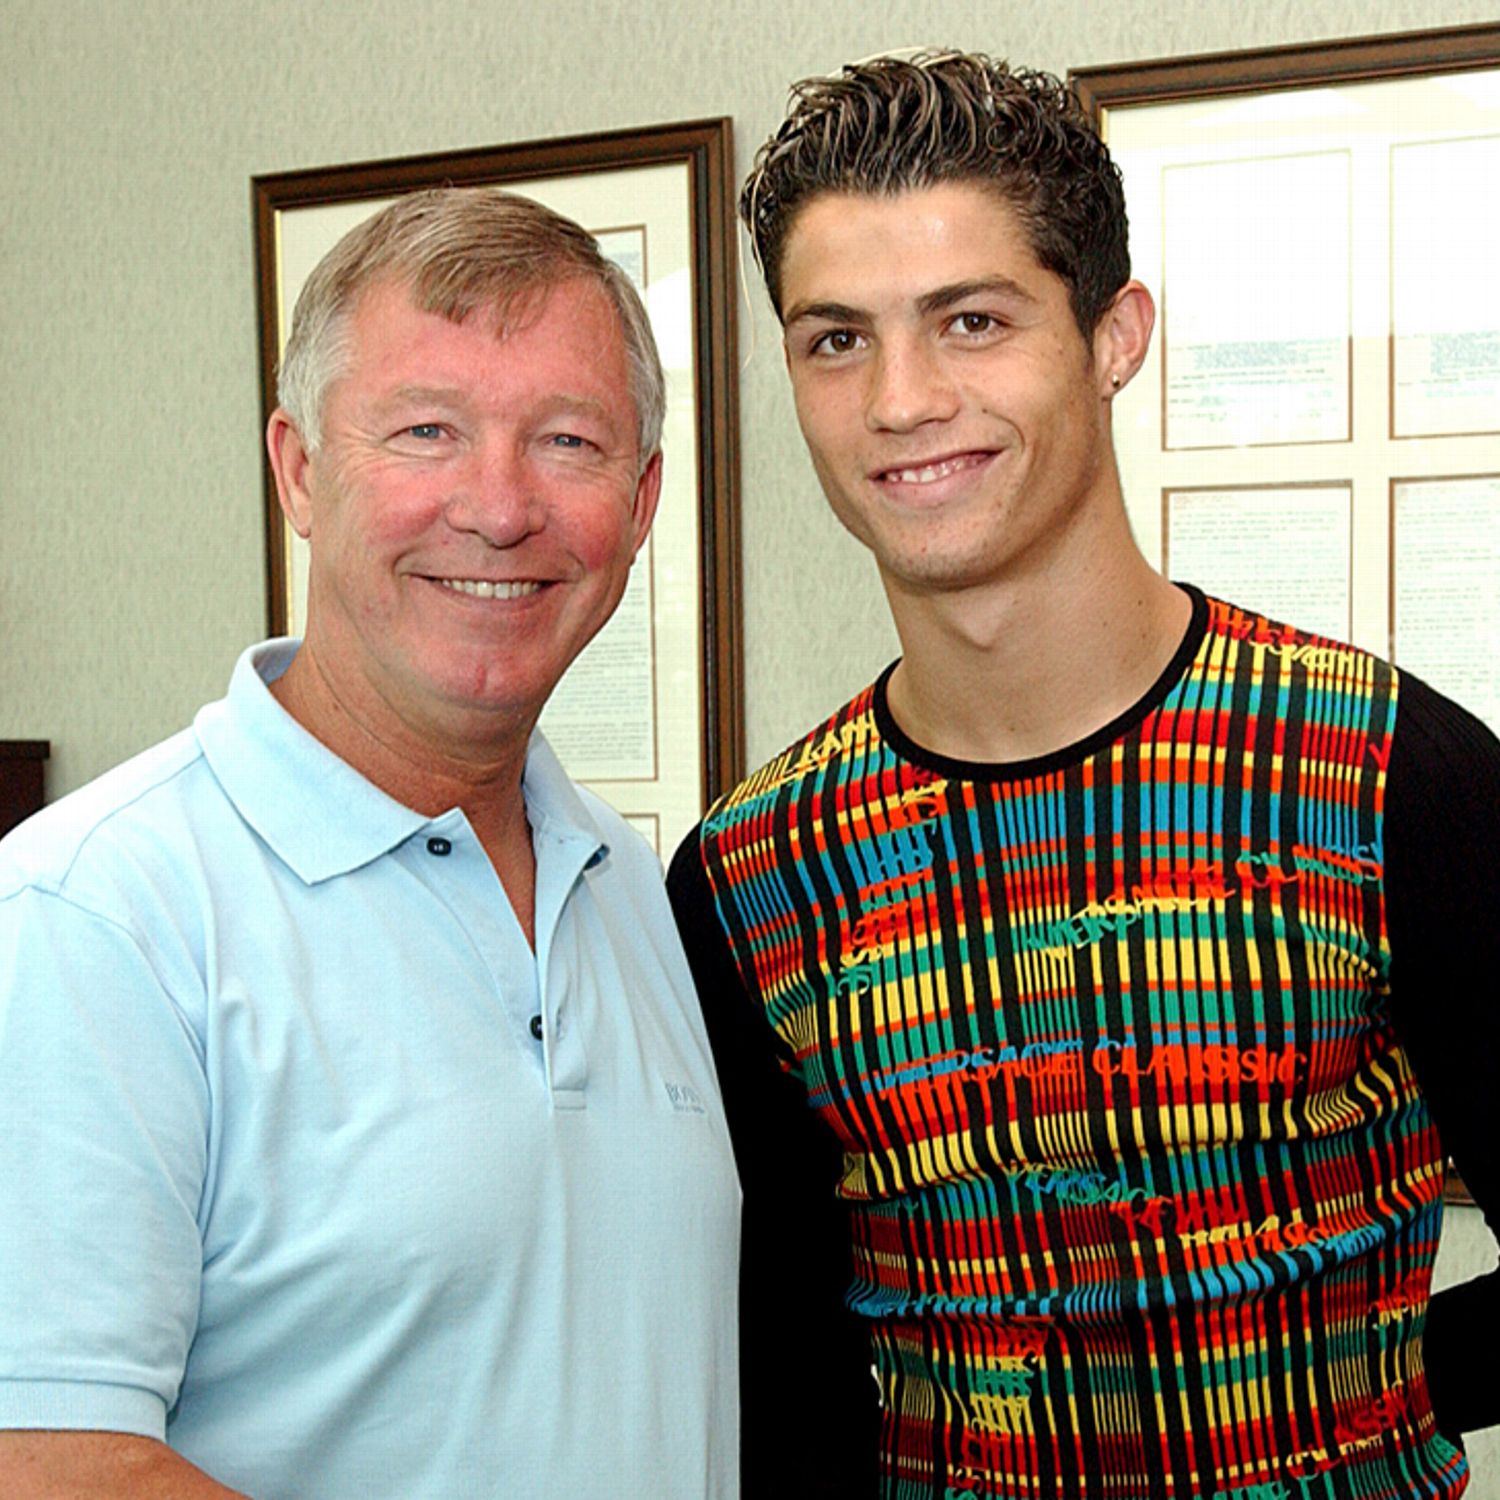 Cristiano Ronaldo Sir Alex Ferguson persuaded me to join Manchester United